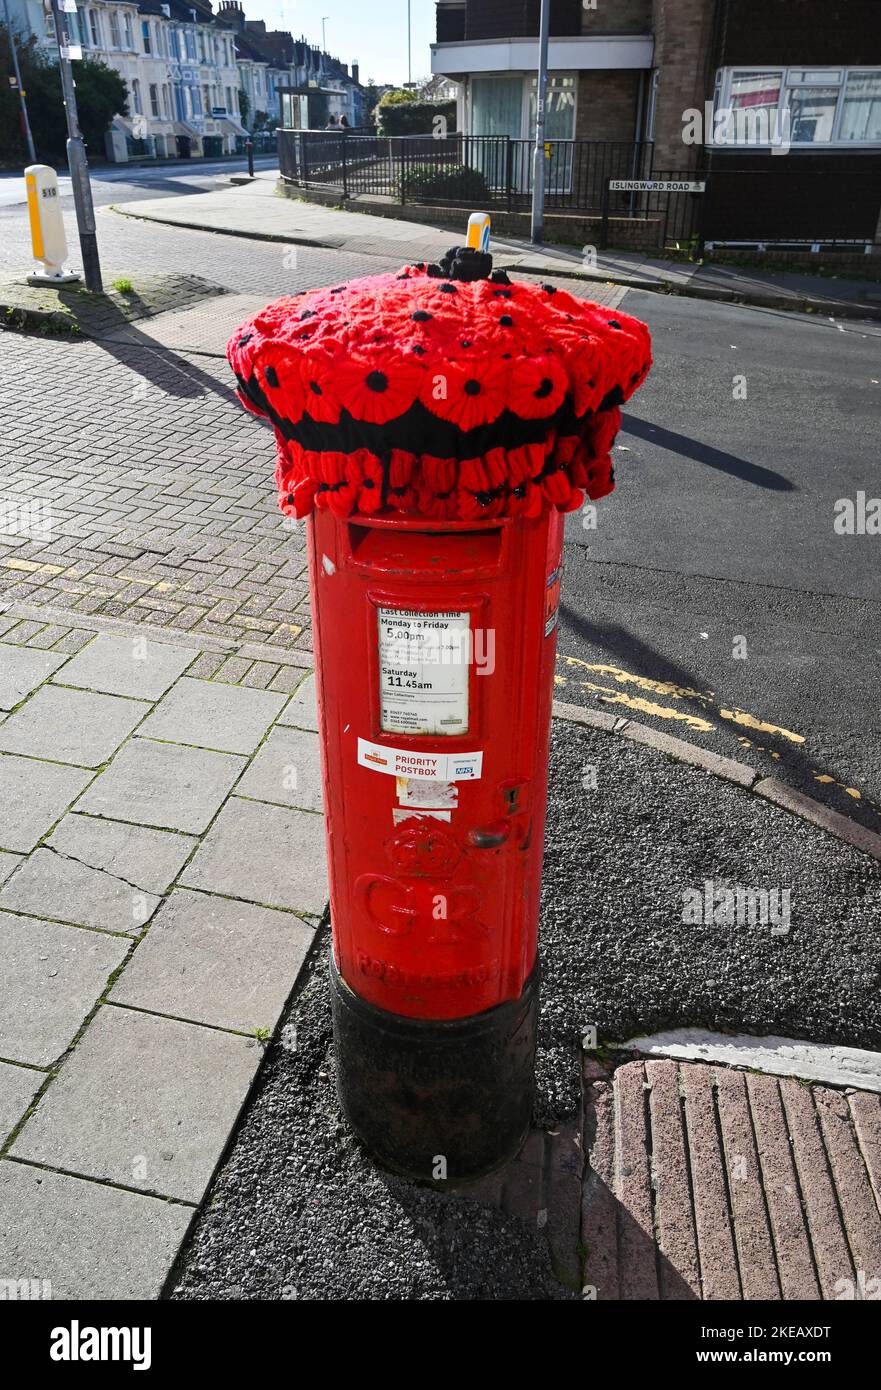 Brighton UK 11th November 2022 - A knitted poppy covering has appeared (yarn bombing) on post box in the Queens Park area of Brighton on Armistice Day in the UK . The Armistice, an agreement to end the fighting of the First World War as a prelude to peace negotiations, began at 11am on 11 November 1918 : Credit Simon Dack / Alamy Live News Stock Photo